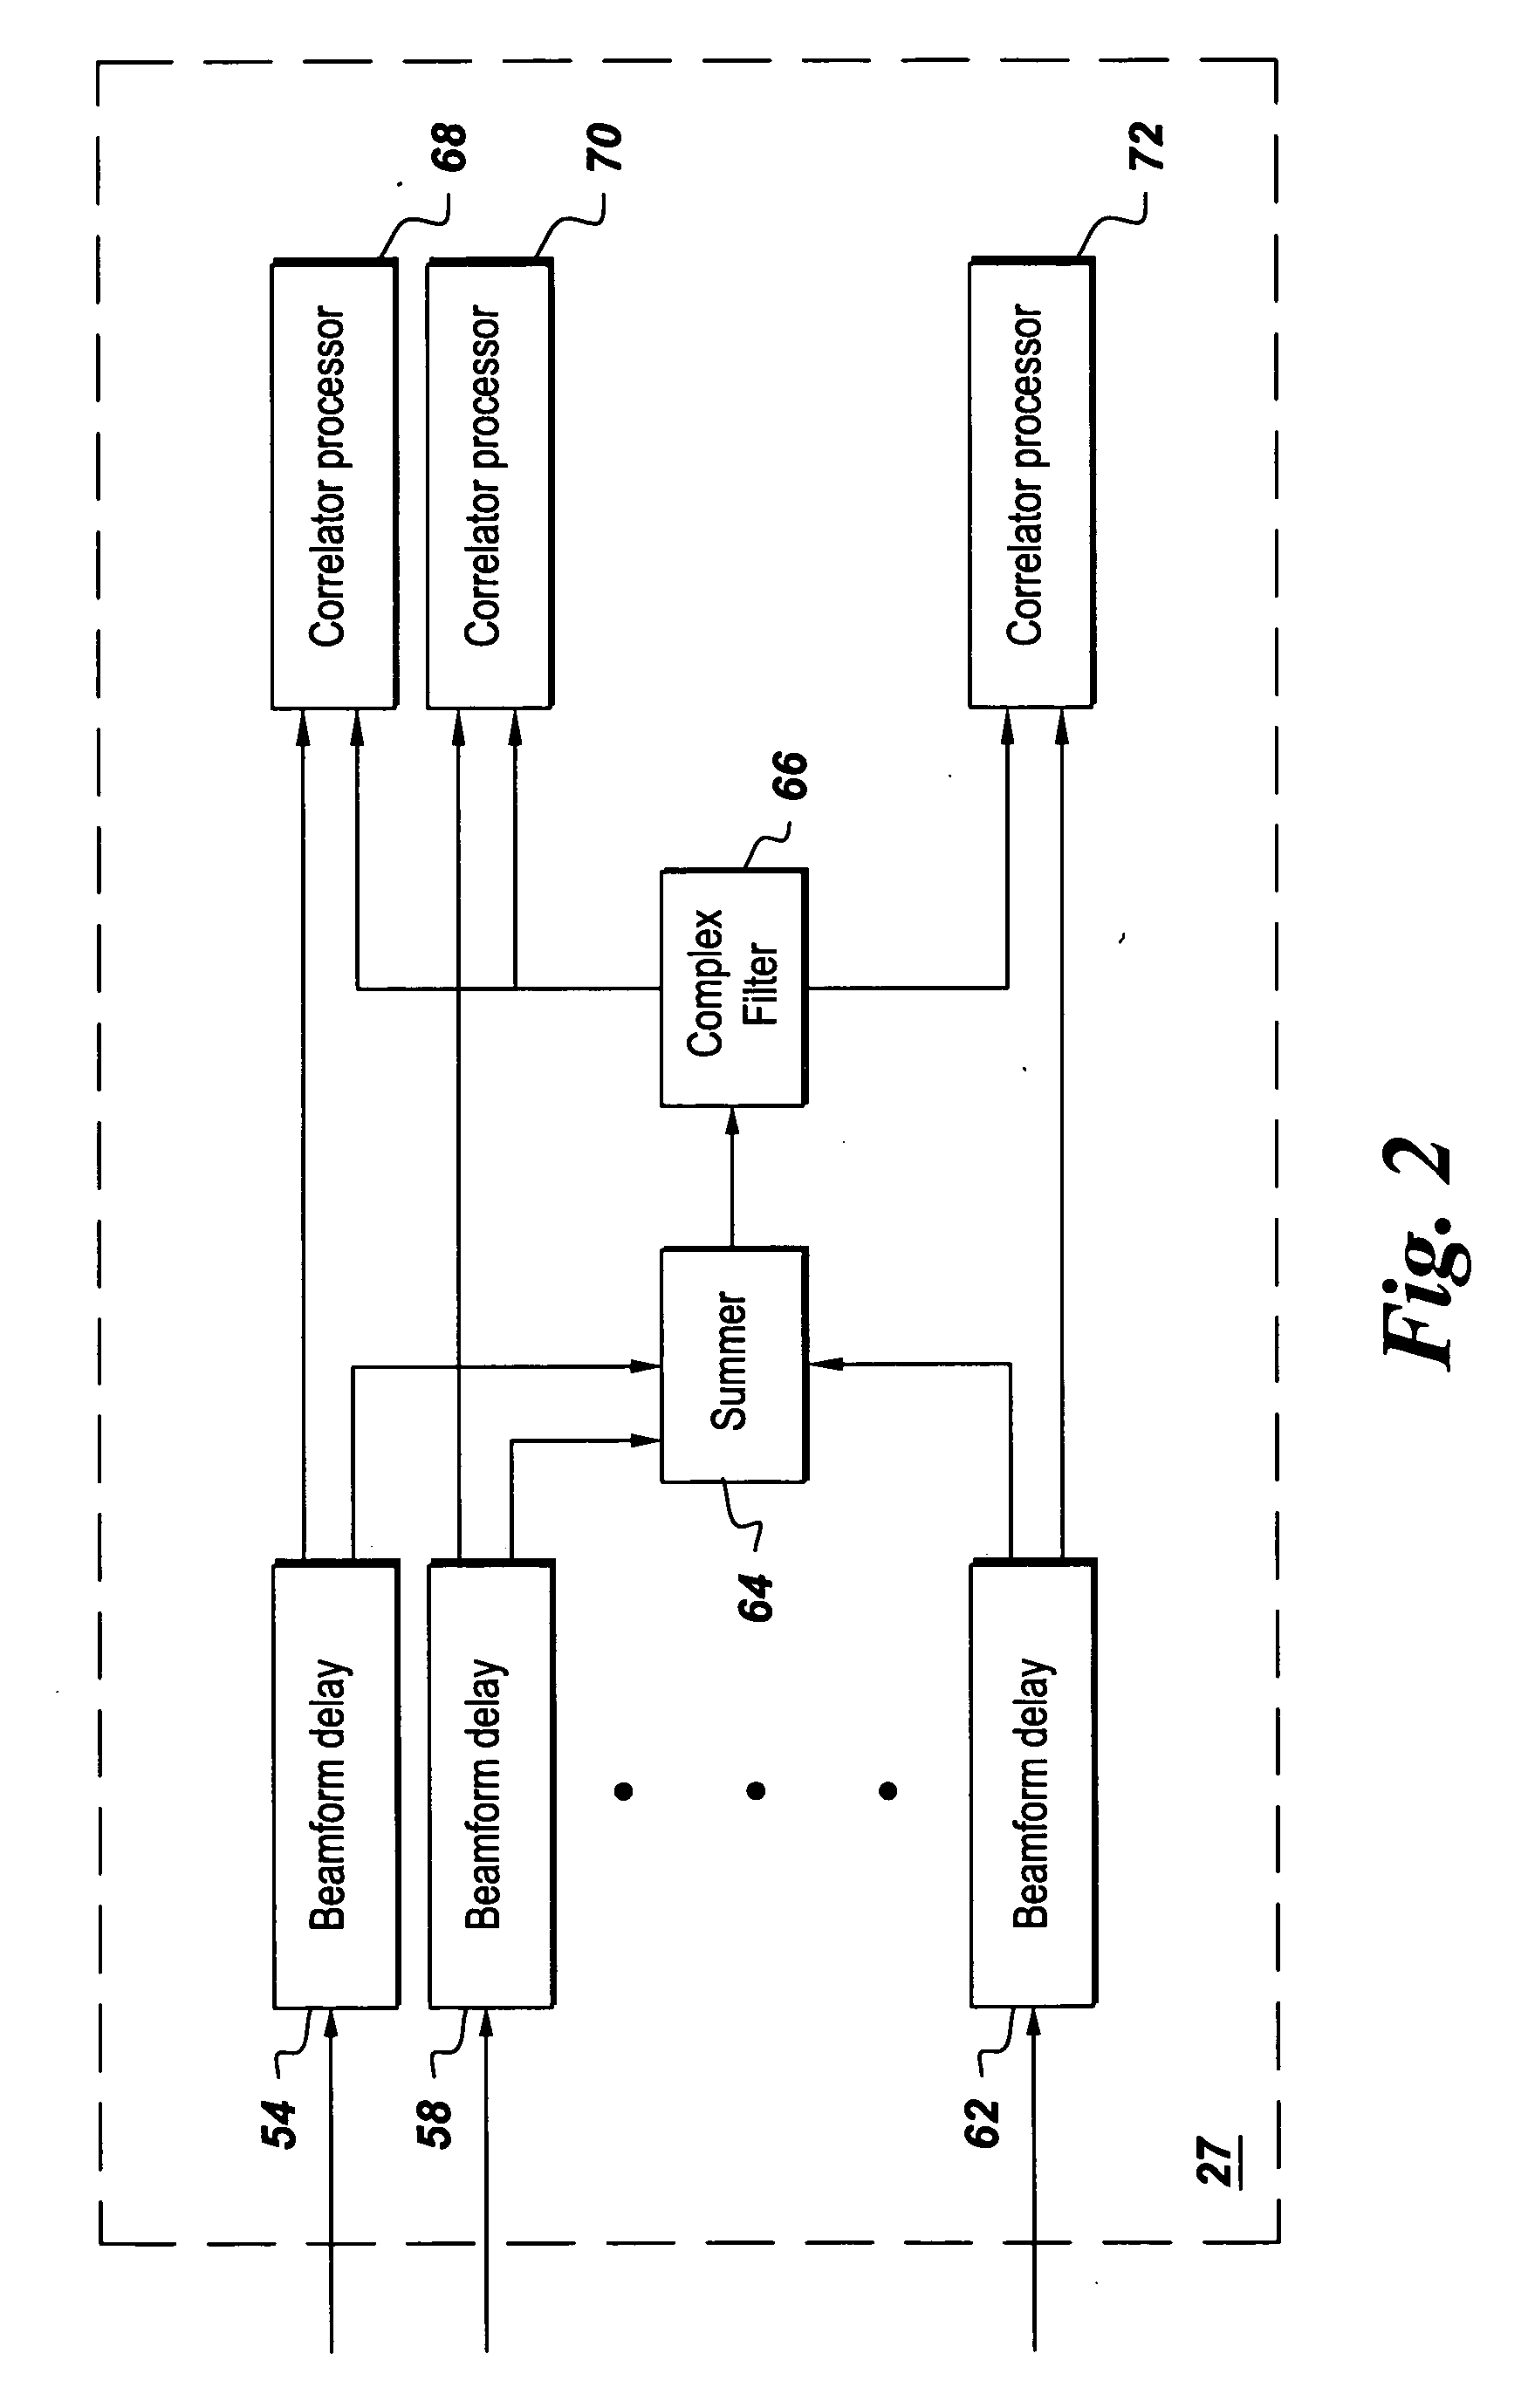 Time delay estimation method and system for use in ultrasound imaging